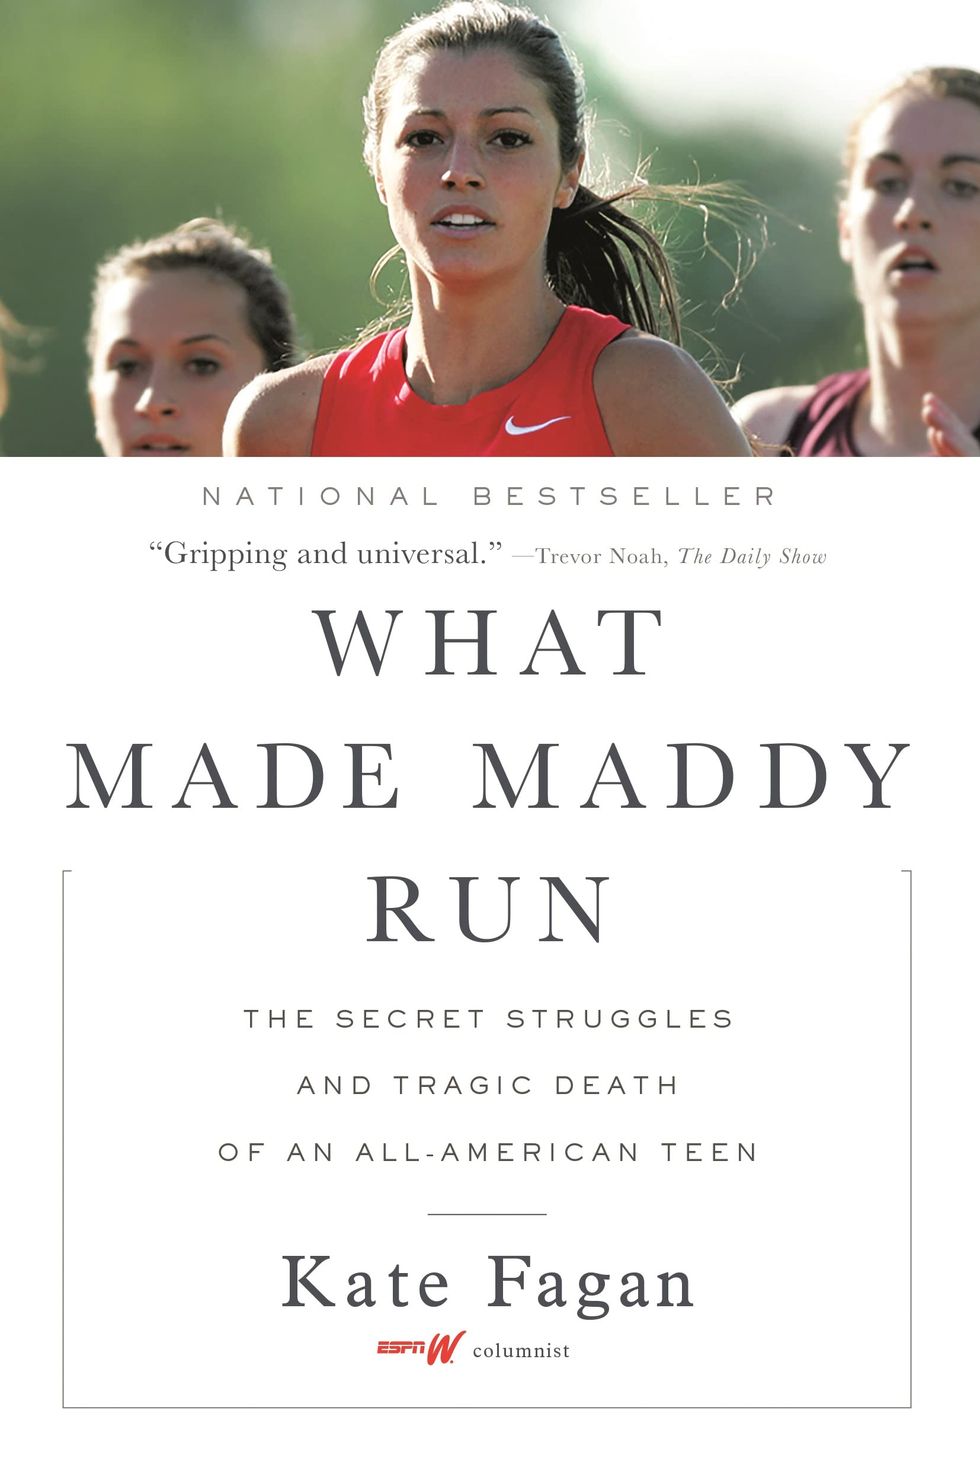 'What Made Maddy Run: The Secret Struggles and Tragic Death of an All-American Teen' by Kate Fagan